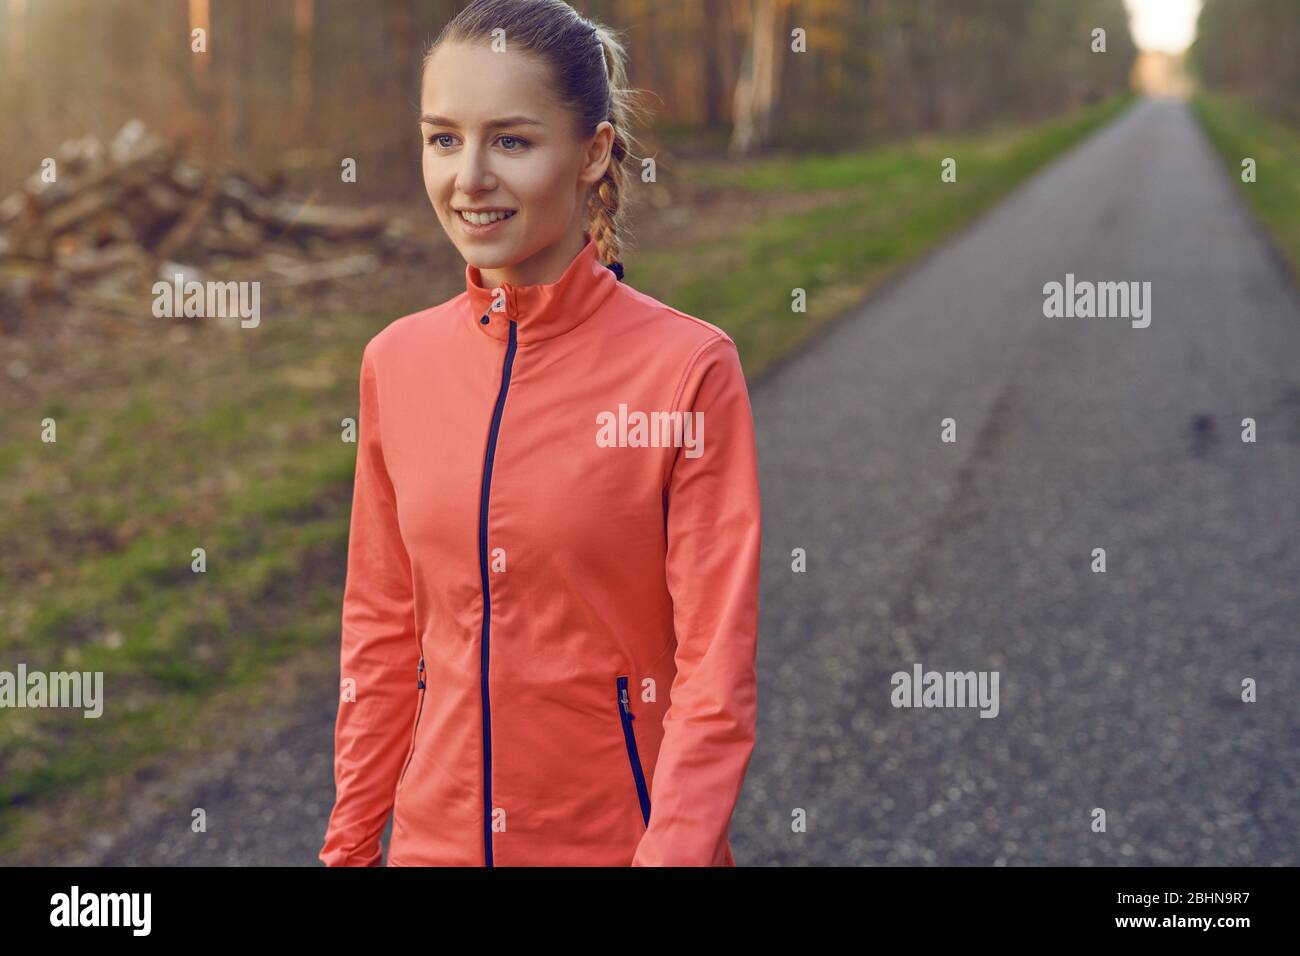 Smiling athletic fit young woman working out on a tarred lane through forests backlit by the warm glow of the sun in a healthy active lifestyle concep Stock Photo